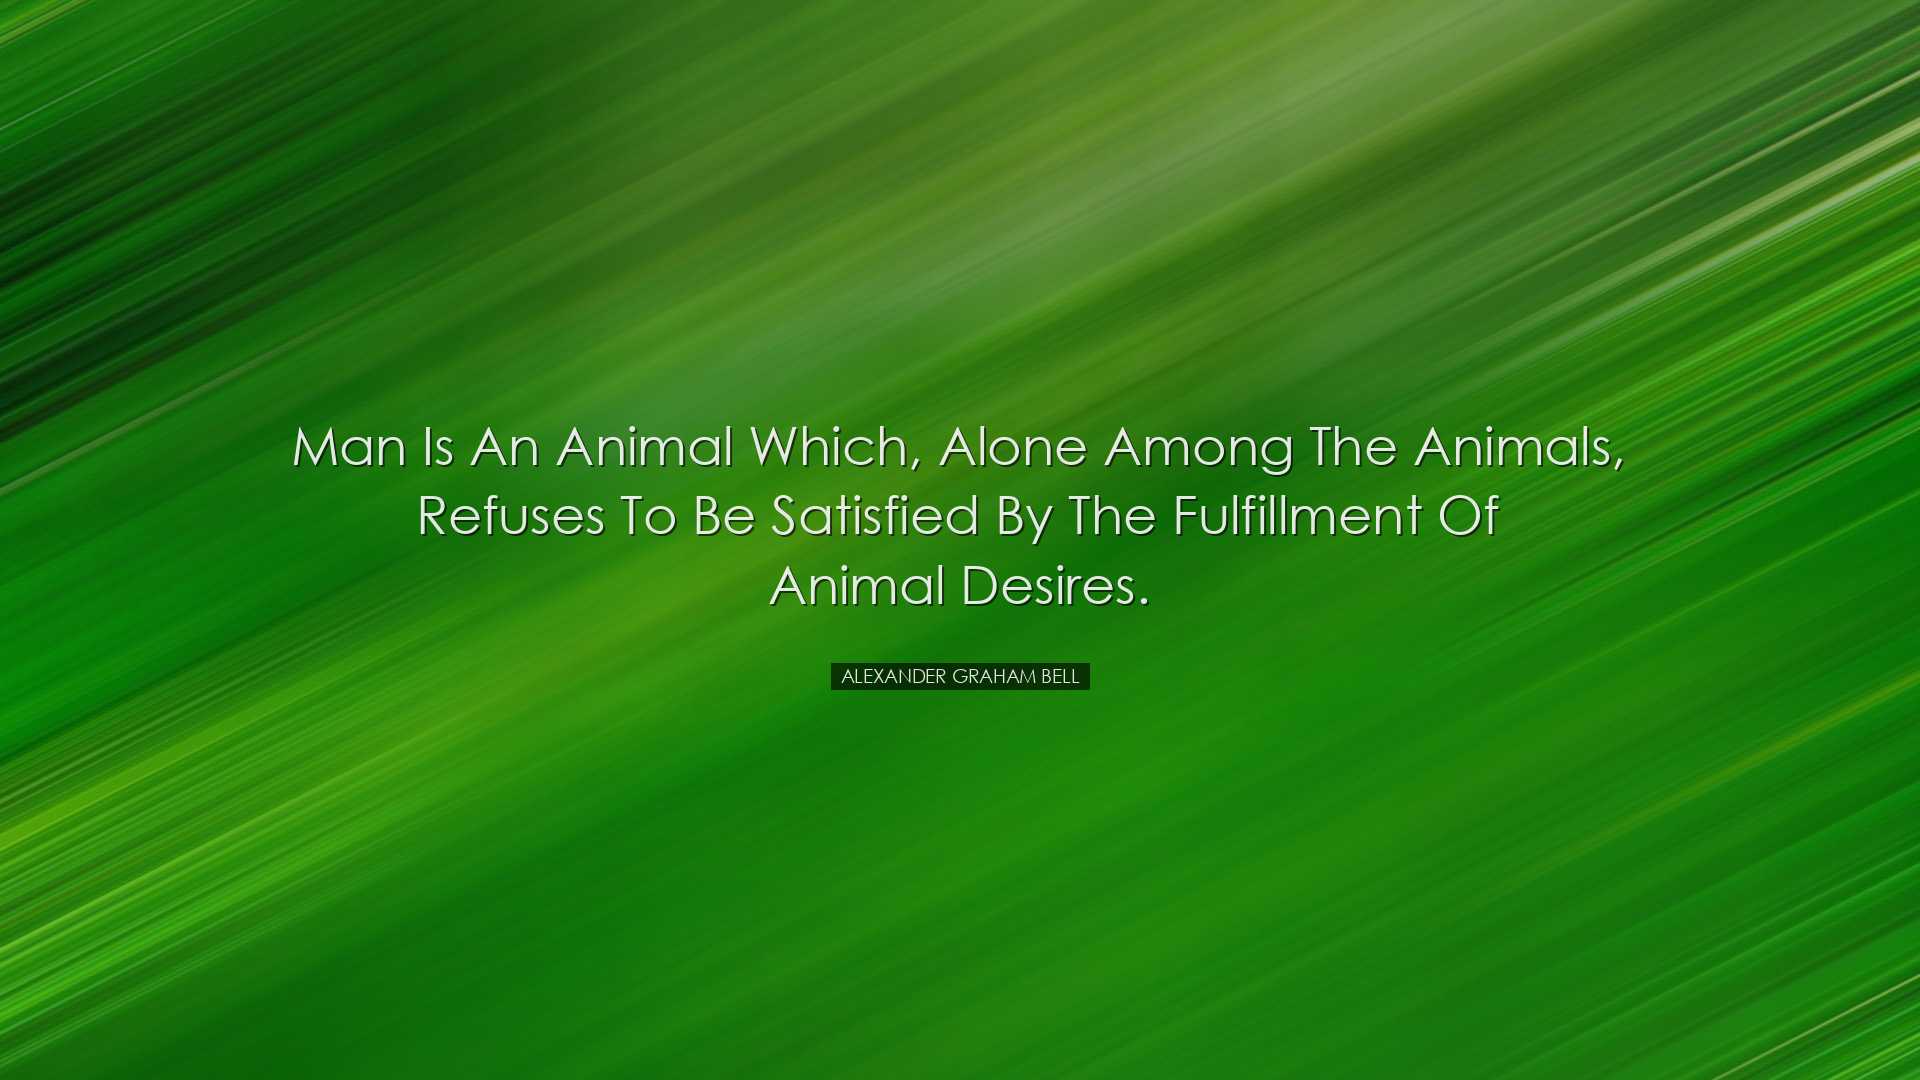 Man is an animal which, alone among the animals, refuses to be sat